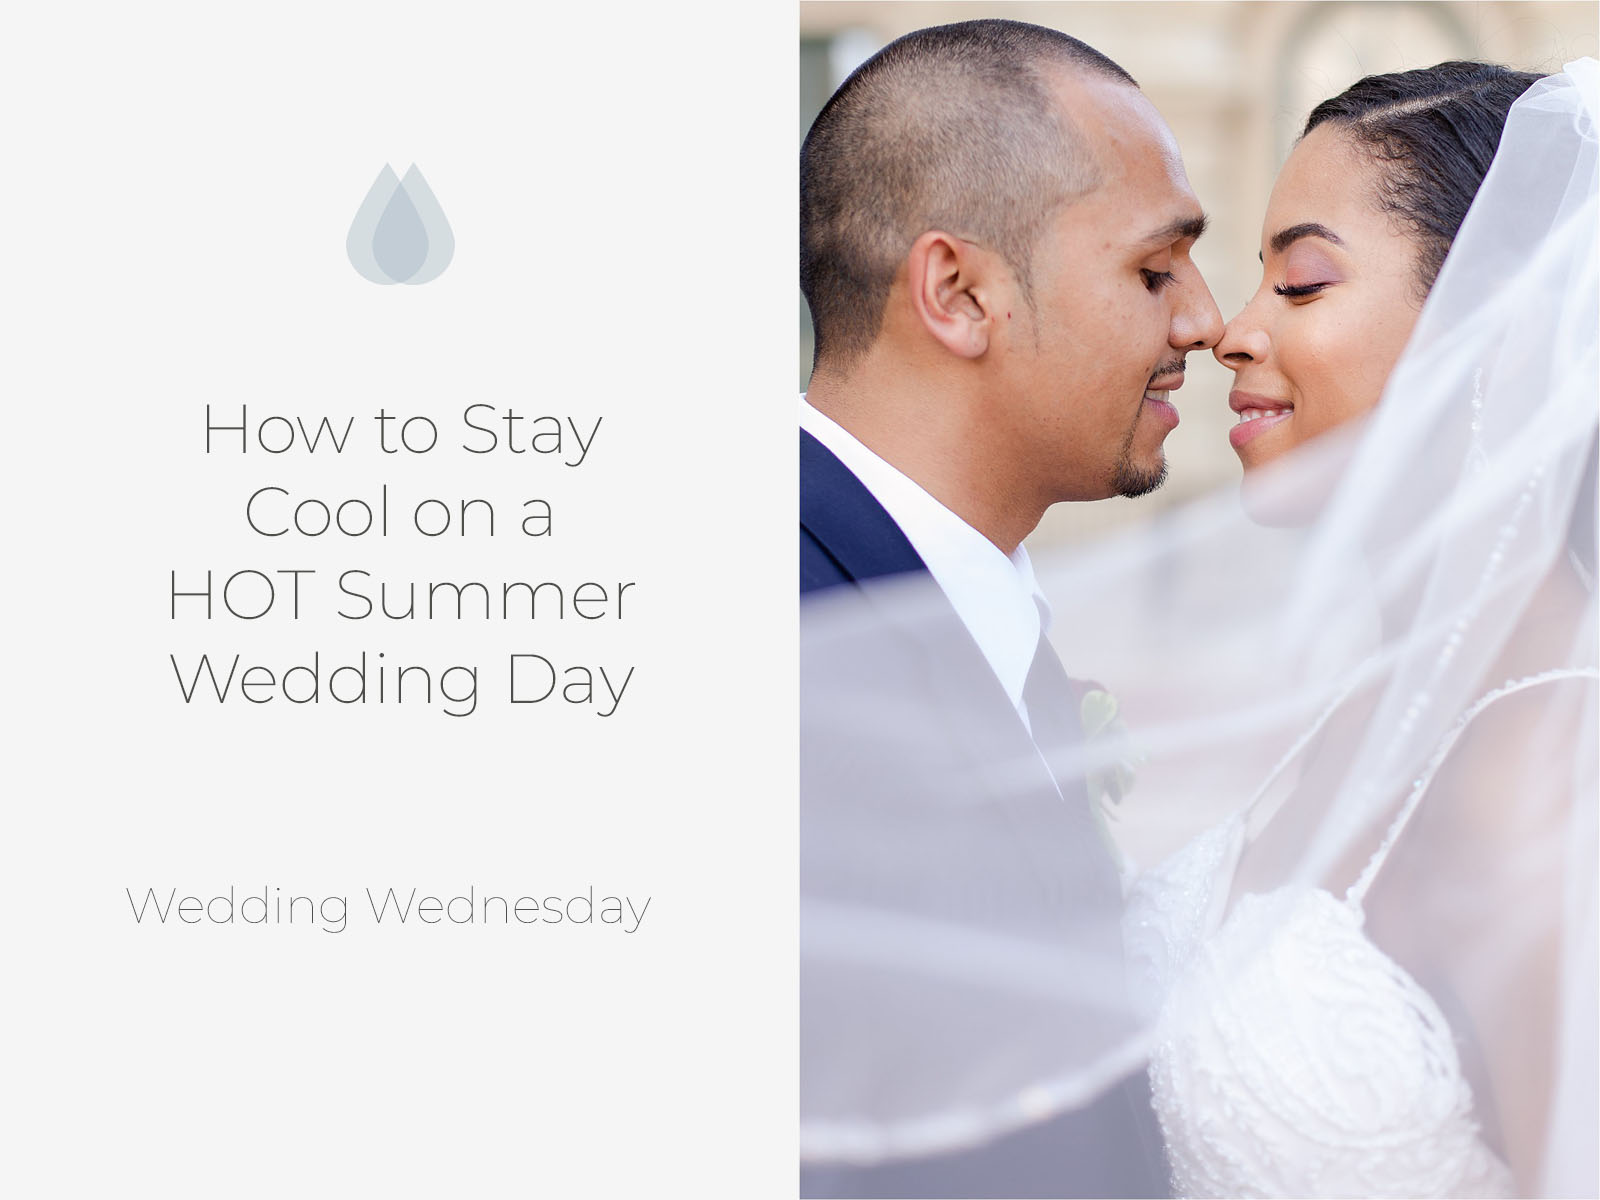 How to Stay Cool on a Hot Summer Wedding Day